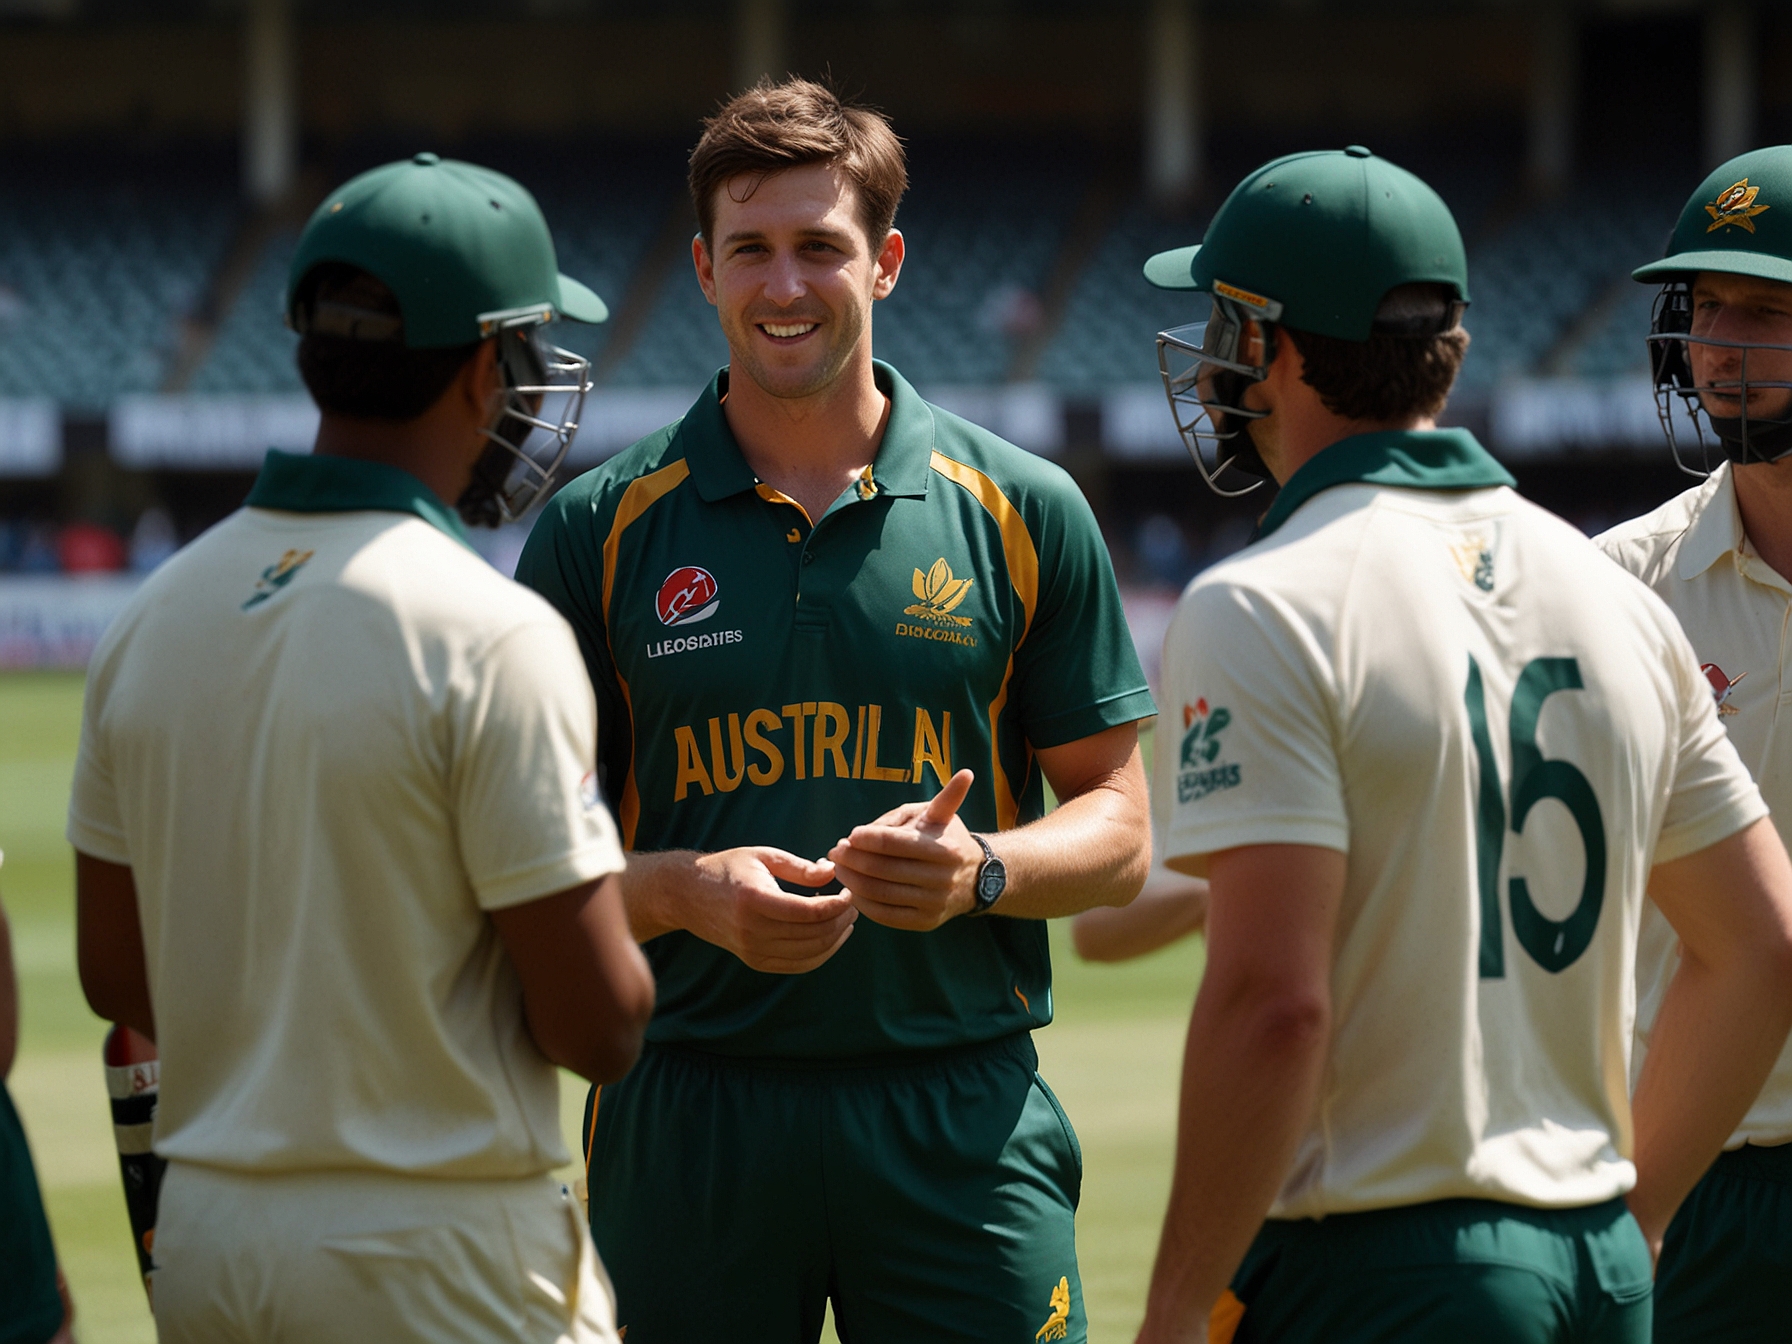 Australian captain Mitch Marsh discussing strategy with teammates on the field ahead of the Super 8s opener against Bangladesh, demonstrating team unity and focus.